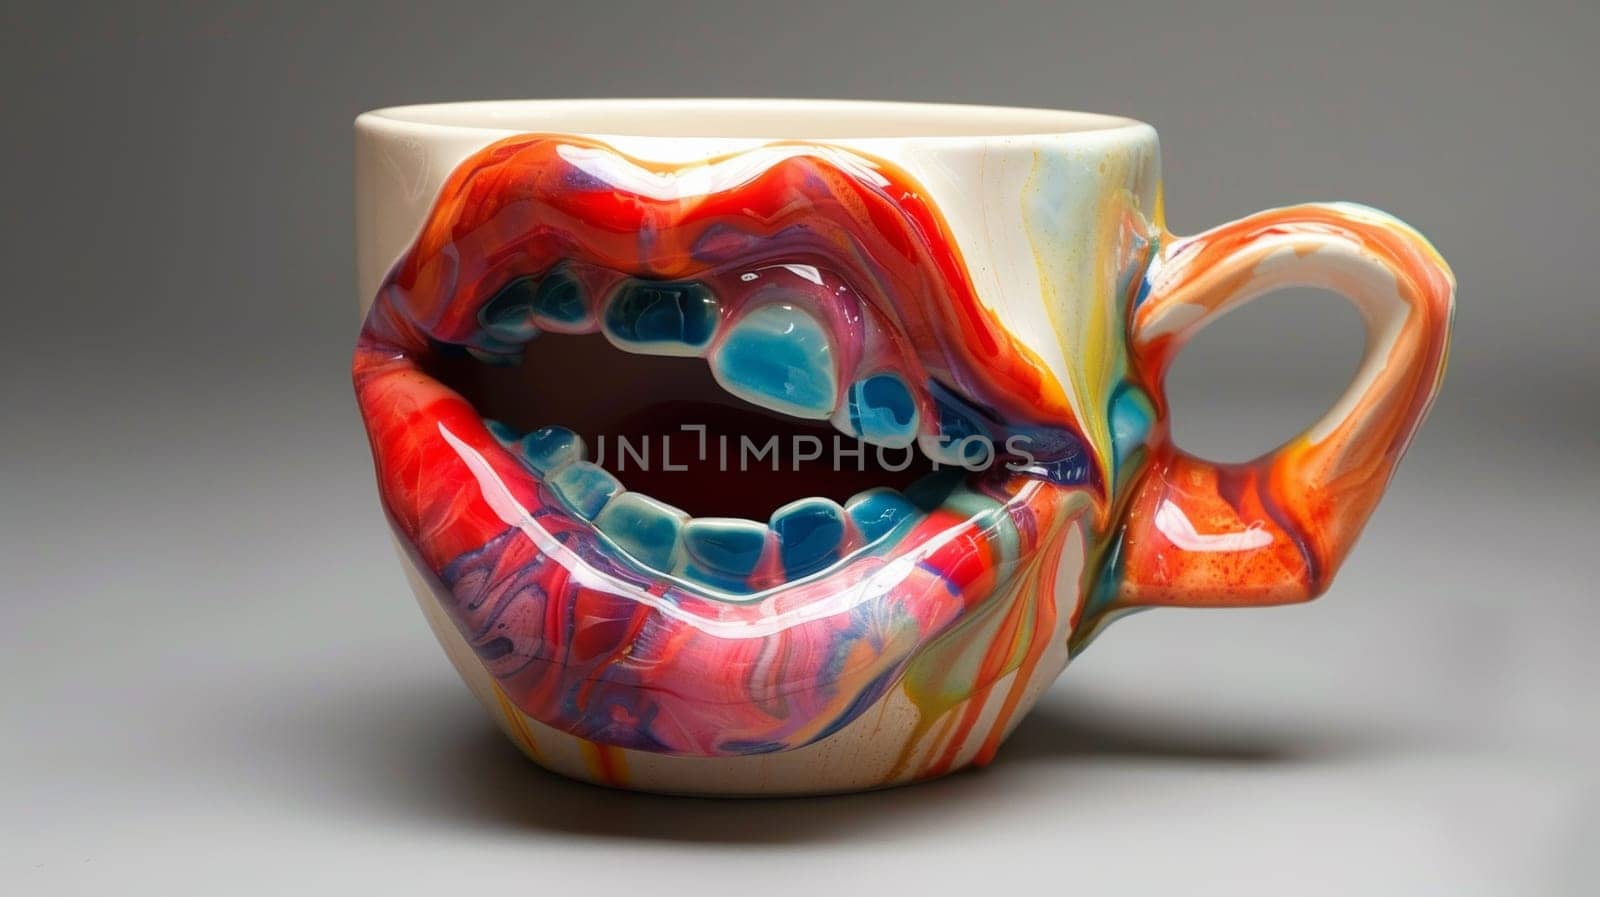 A colorful coffee mug with a mouth painted on it, AI by starush